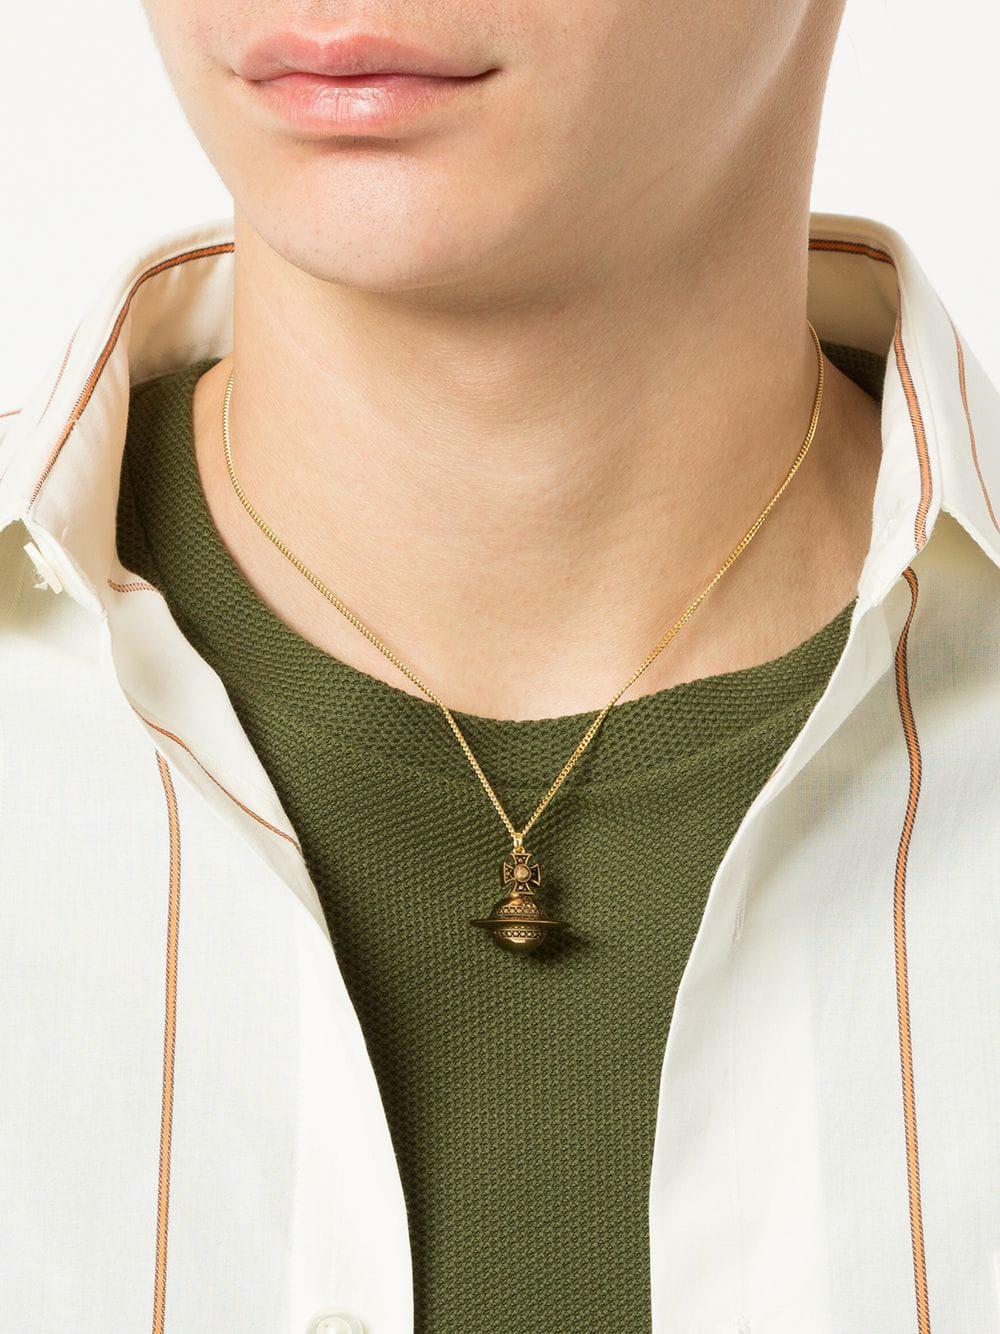 Lyst - Vivienne Westwood Narcissus Small Orb Pendant Necklace in Metallic